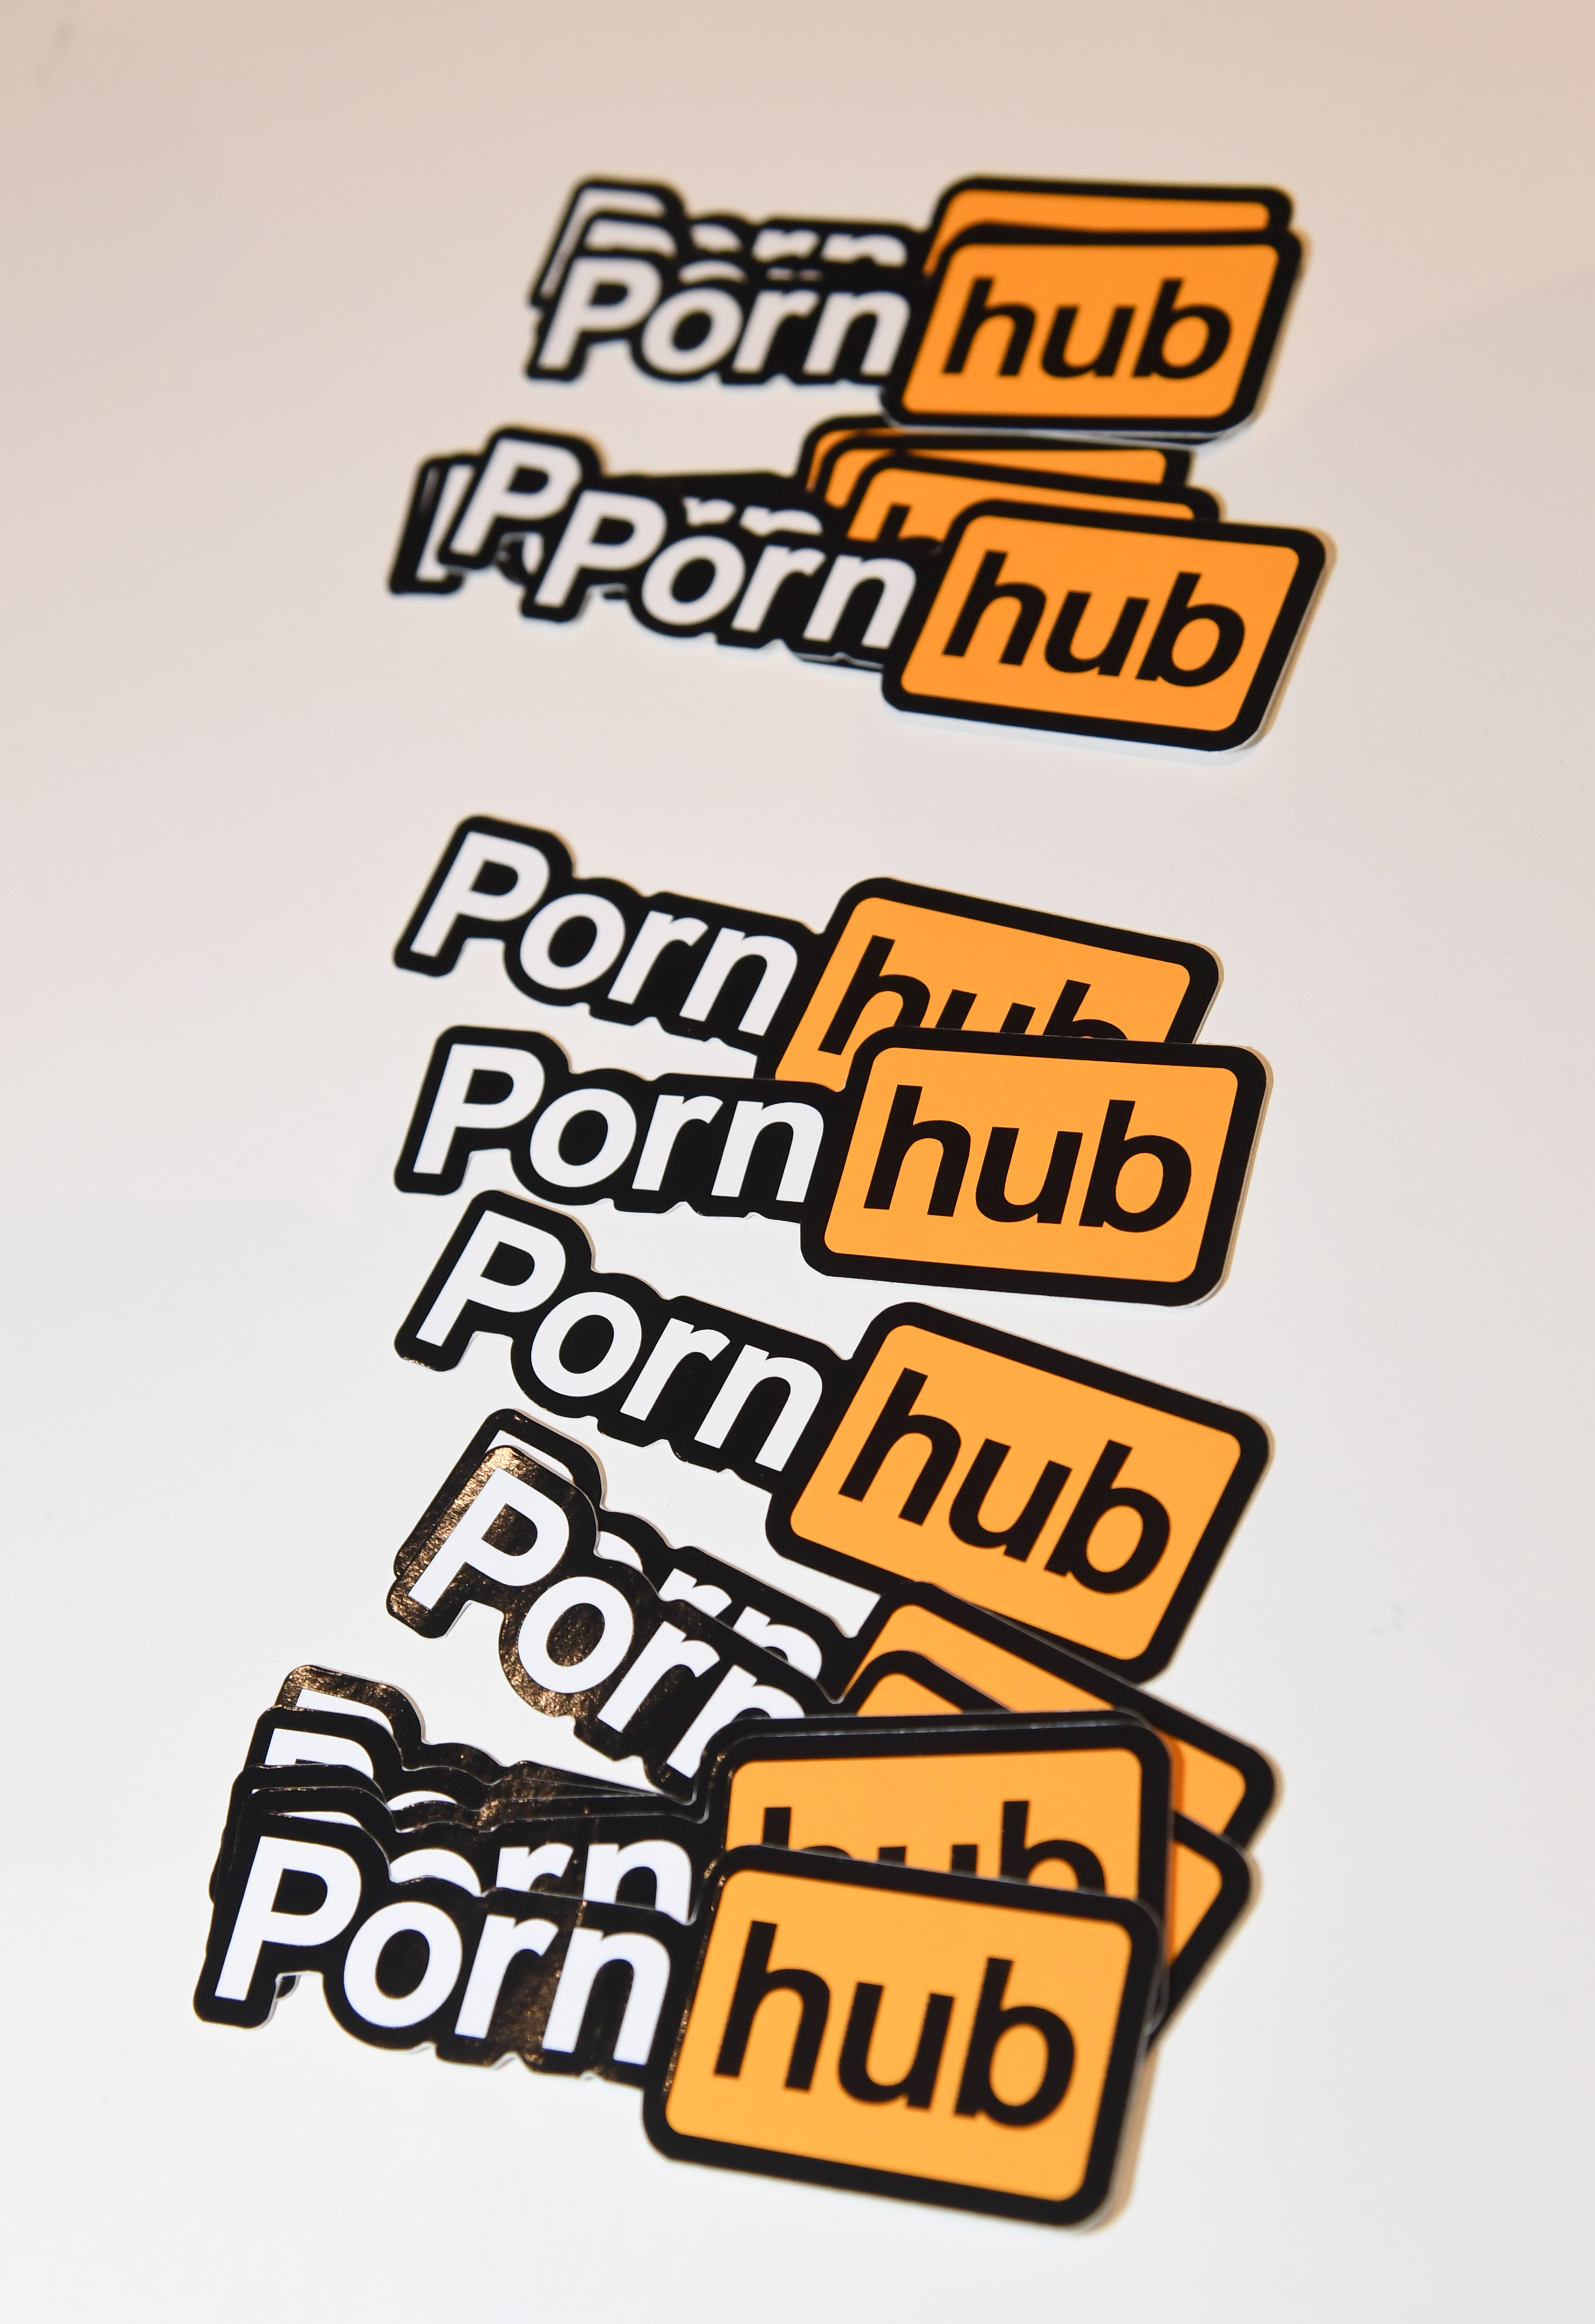 Pornhub Just Purged All Unverified Content From the Platform pic